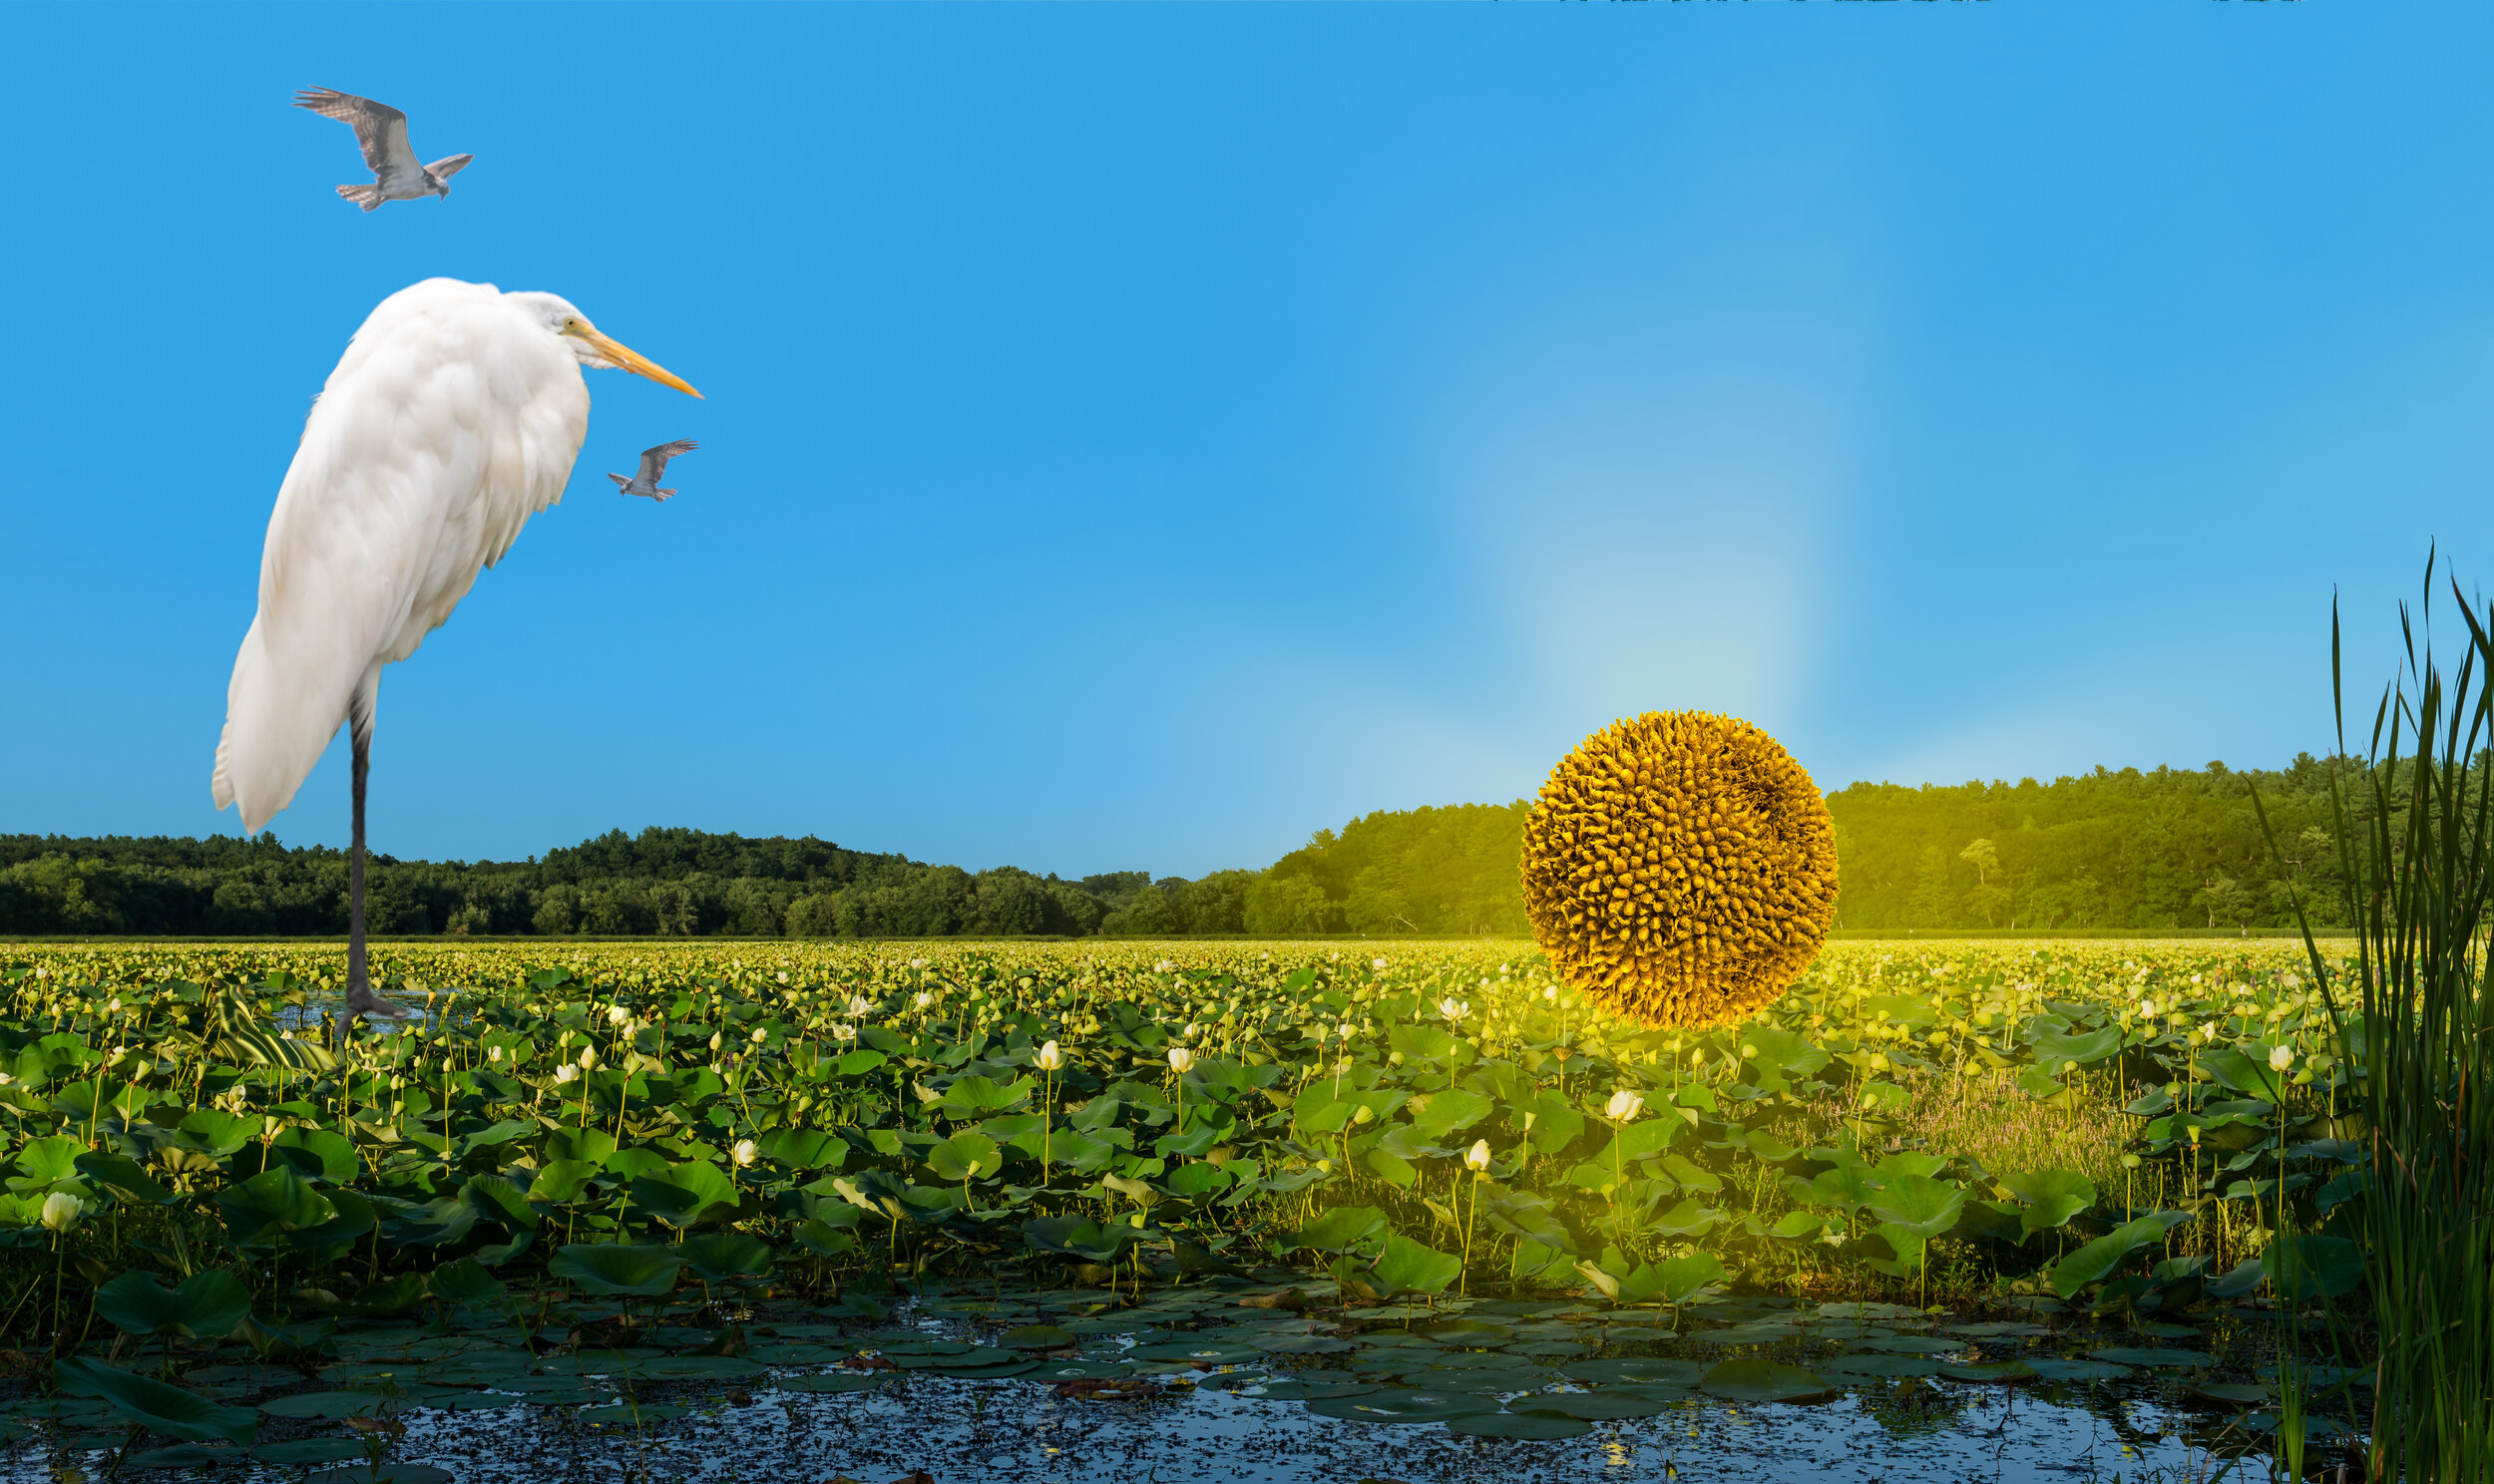  The base image is a large marsh filled with lotus blossoms and seed pods. To me this made Great Meadows in Concord a magical place.  So I added a huge Great Egret, guardian spirit of all birds, with a crown of flying osprey.  The Egret is watching a